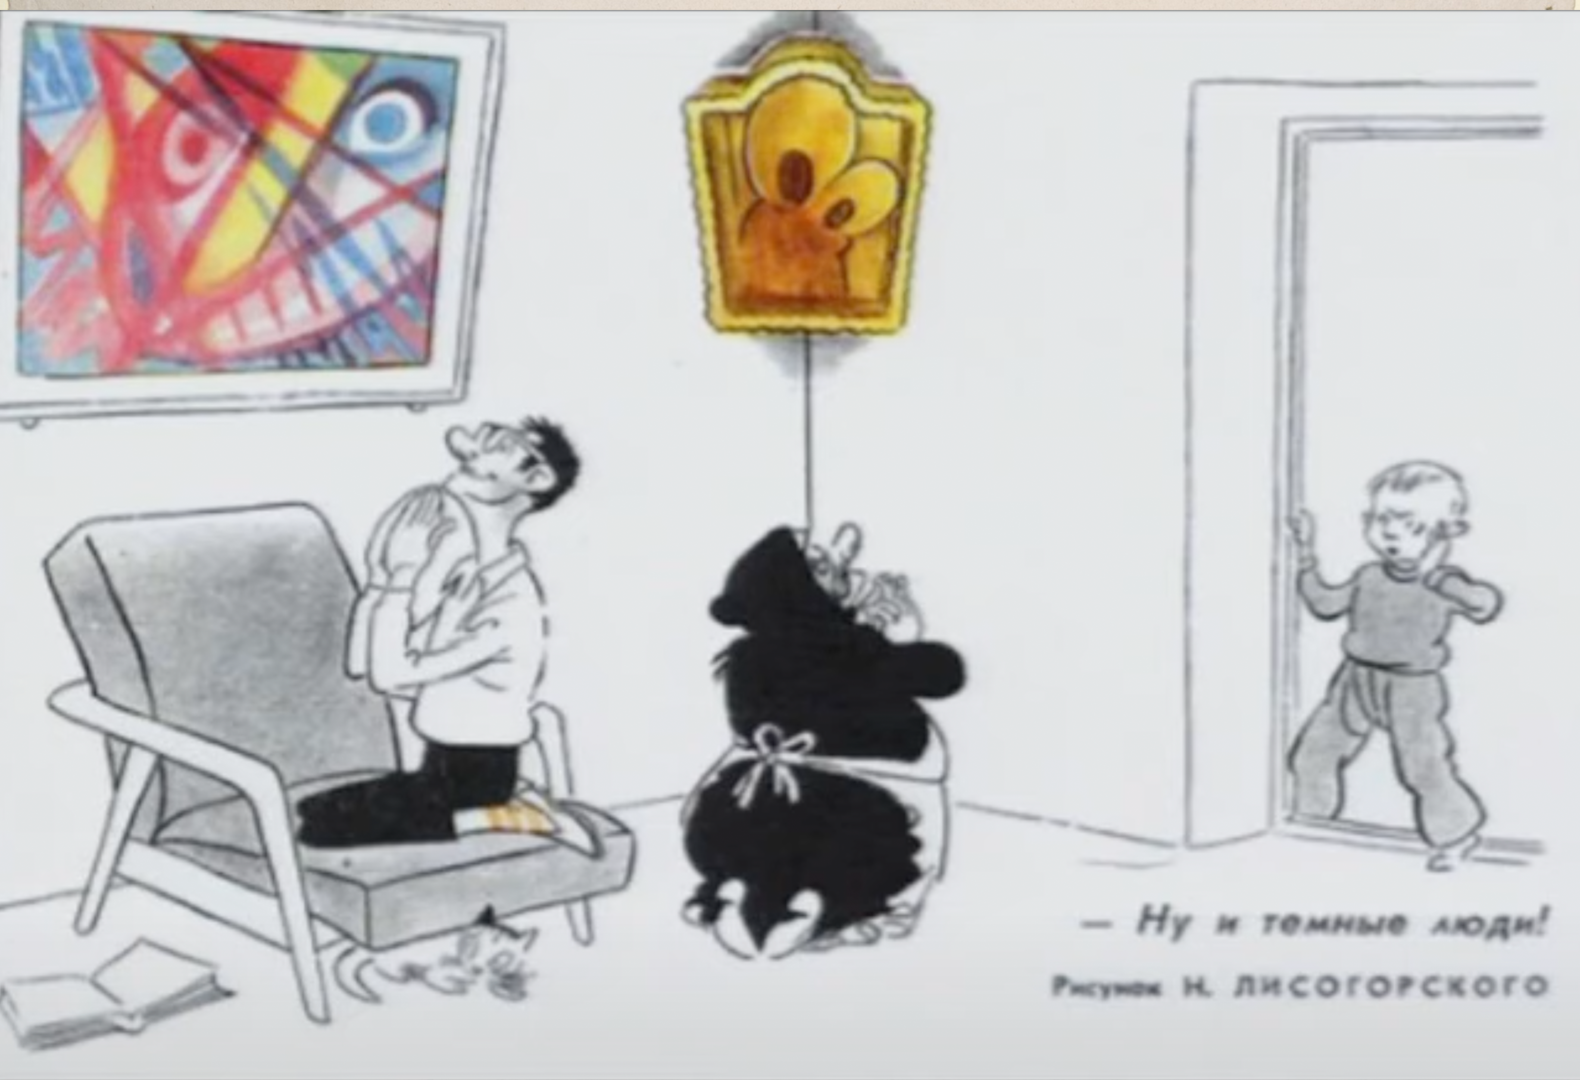 Soviet cartoon depicting an older woman worshipping a religious idol and a younger man worshipping modern art